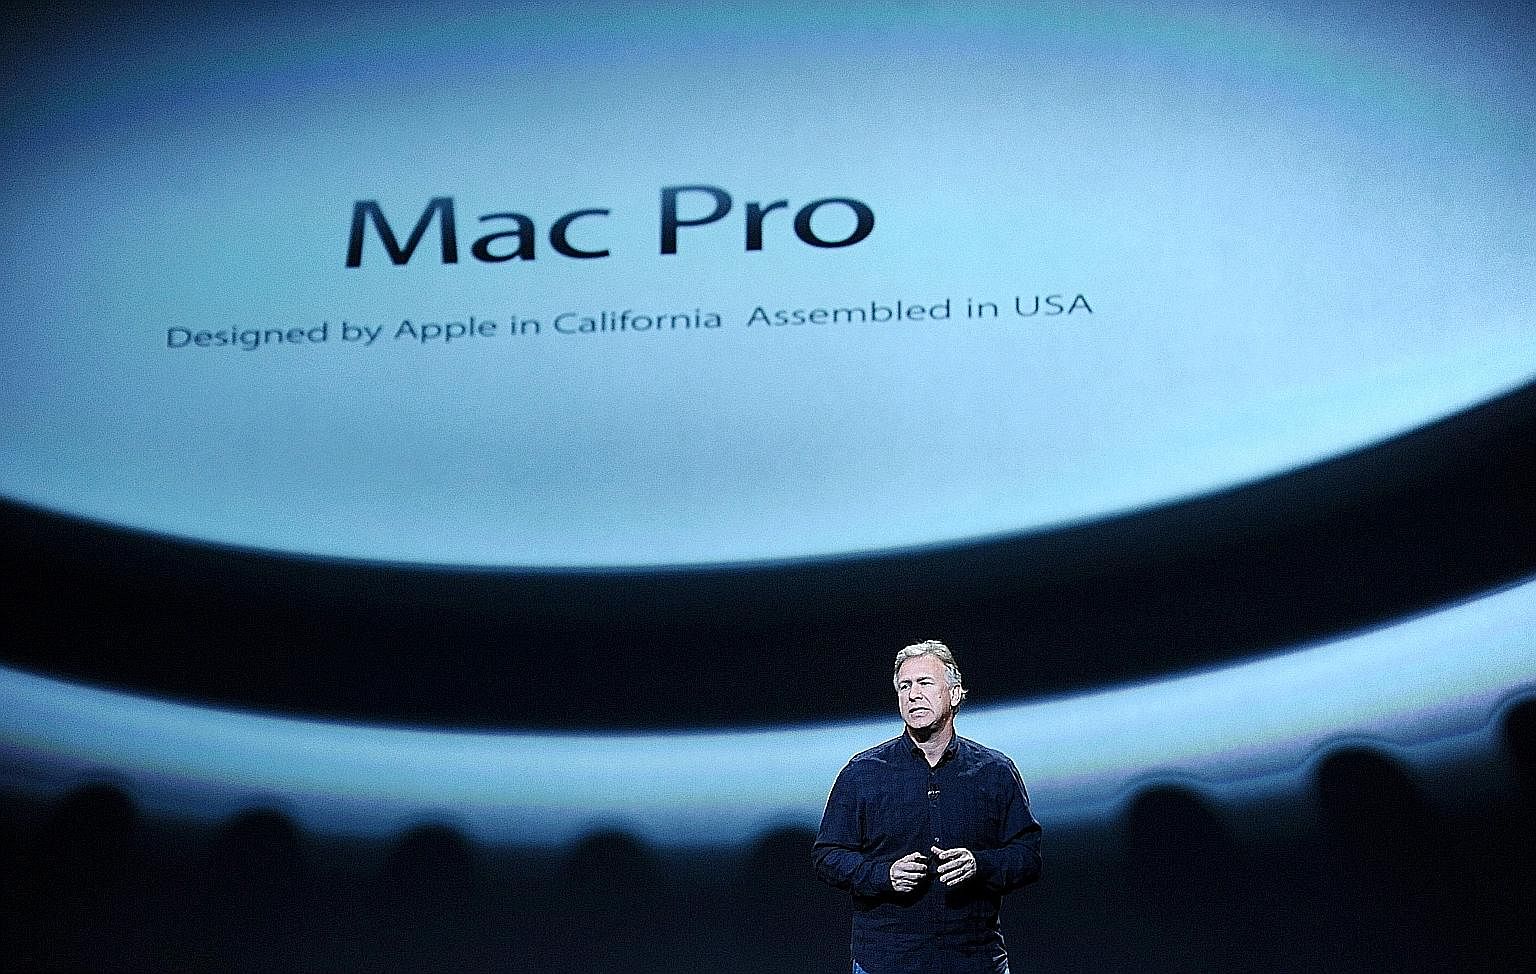 Mr Phil Schiller, Apple's senior vice-president of worldwide marketing, introducing the Mac Pro in October 2013. Last week, he and two of his senior colleagues revealed that the next Mac Pro will be modular.